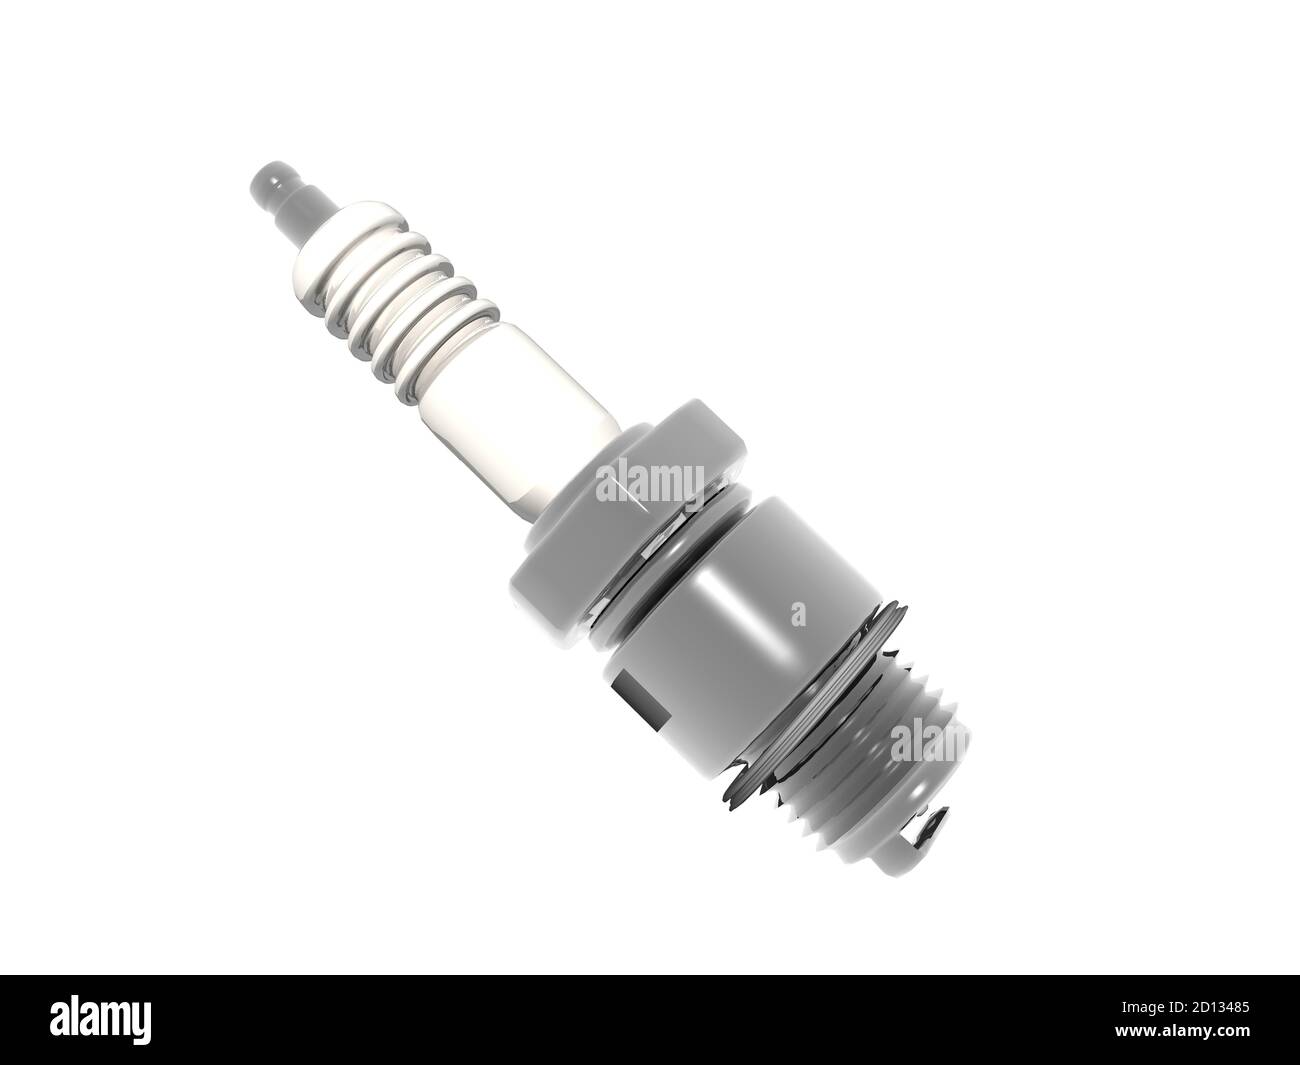 Spark Plug With Ceramic Insulator Metal Base And, Insulator, Contacts,  Ceramic PNG Transparent Image and Clipart for Free Download